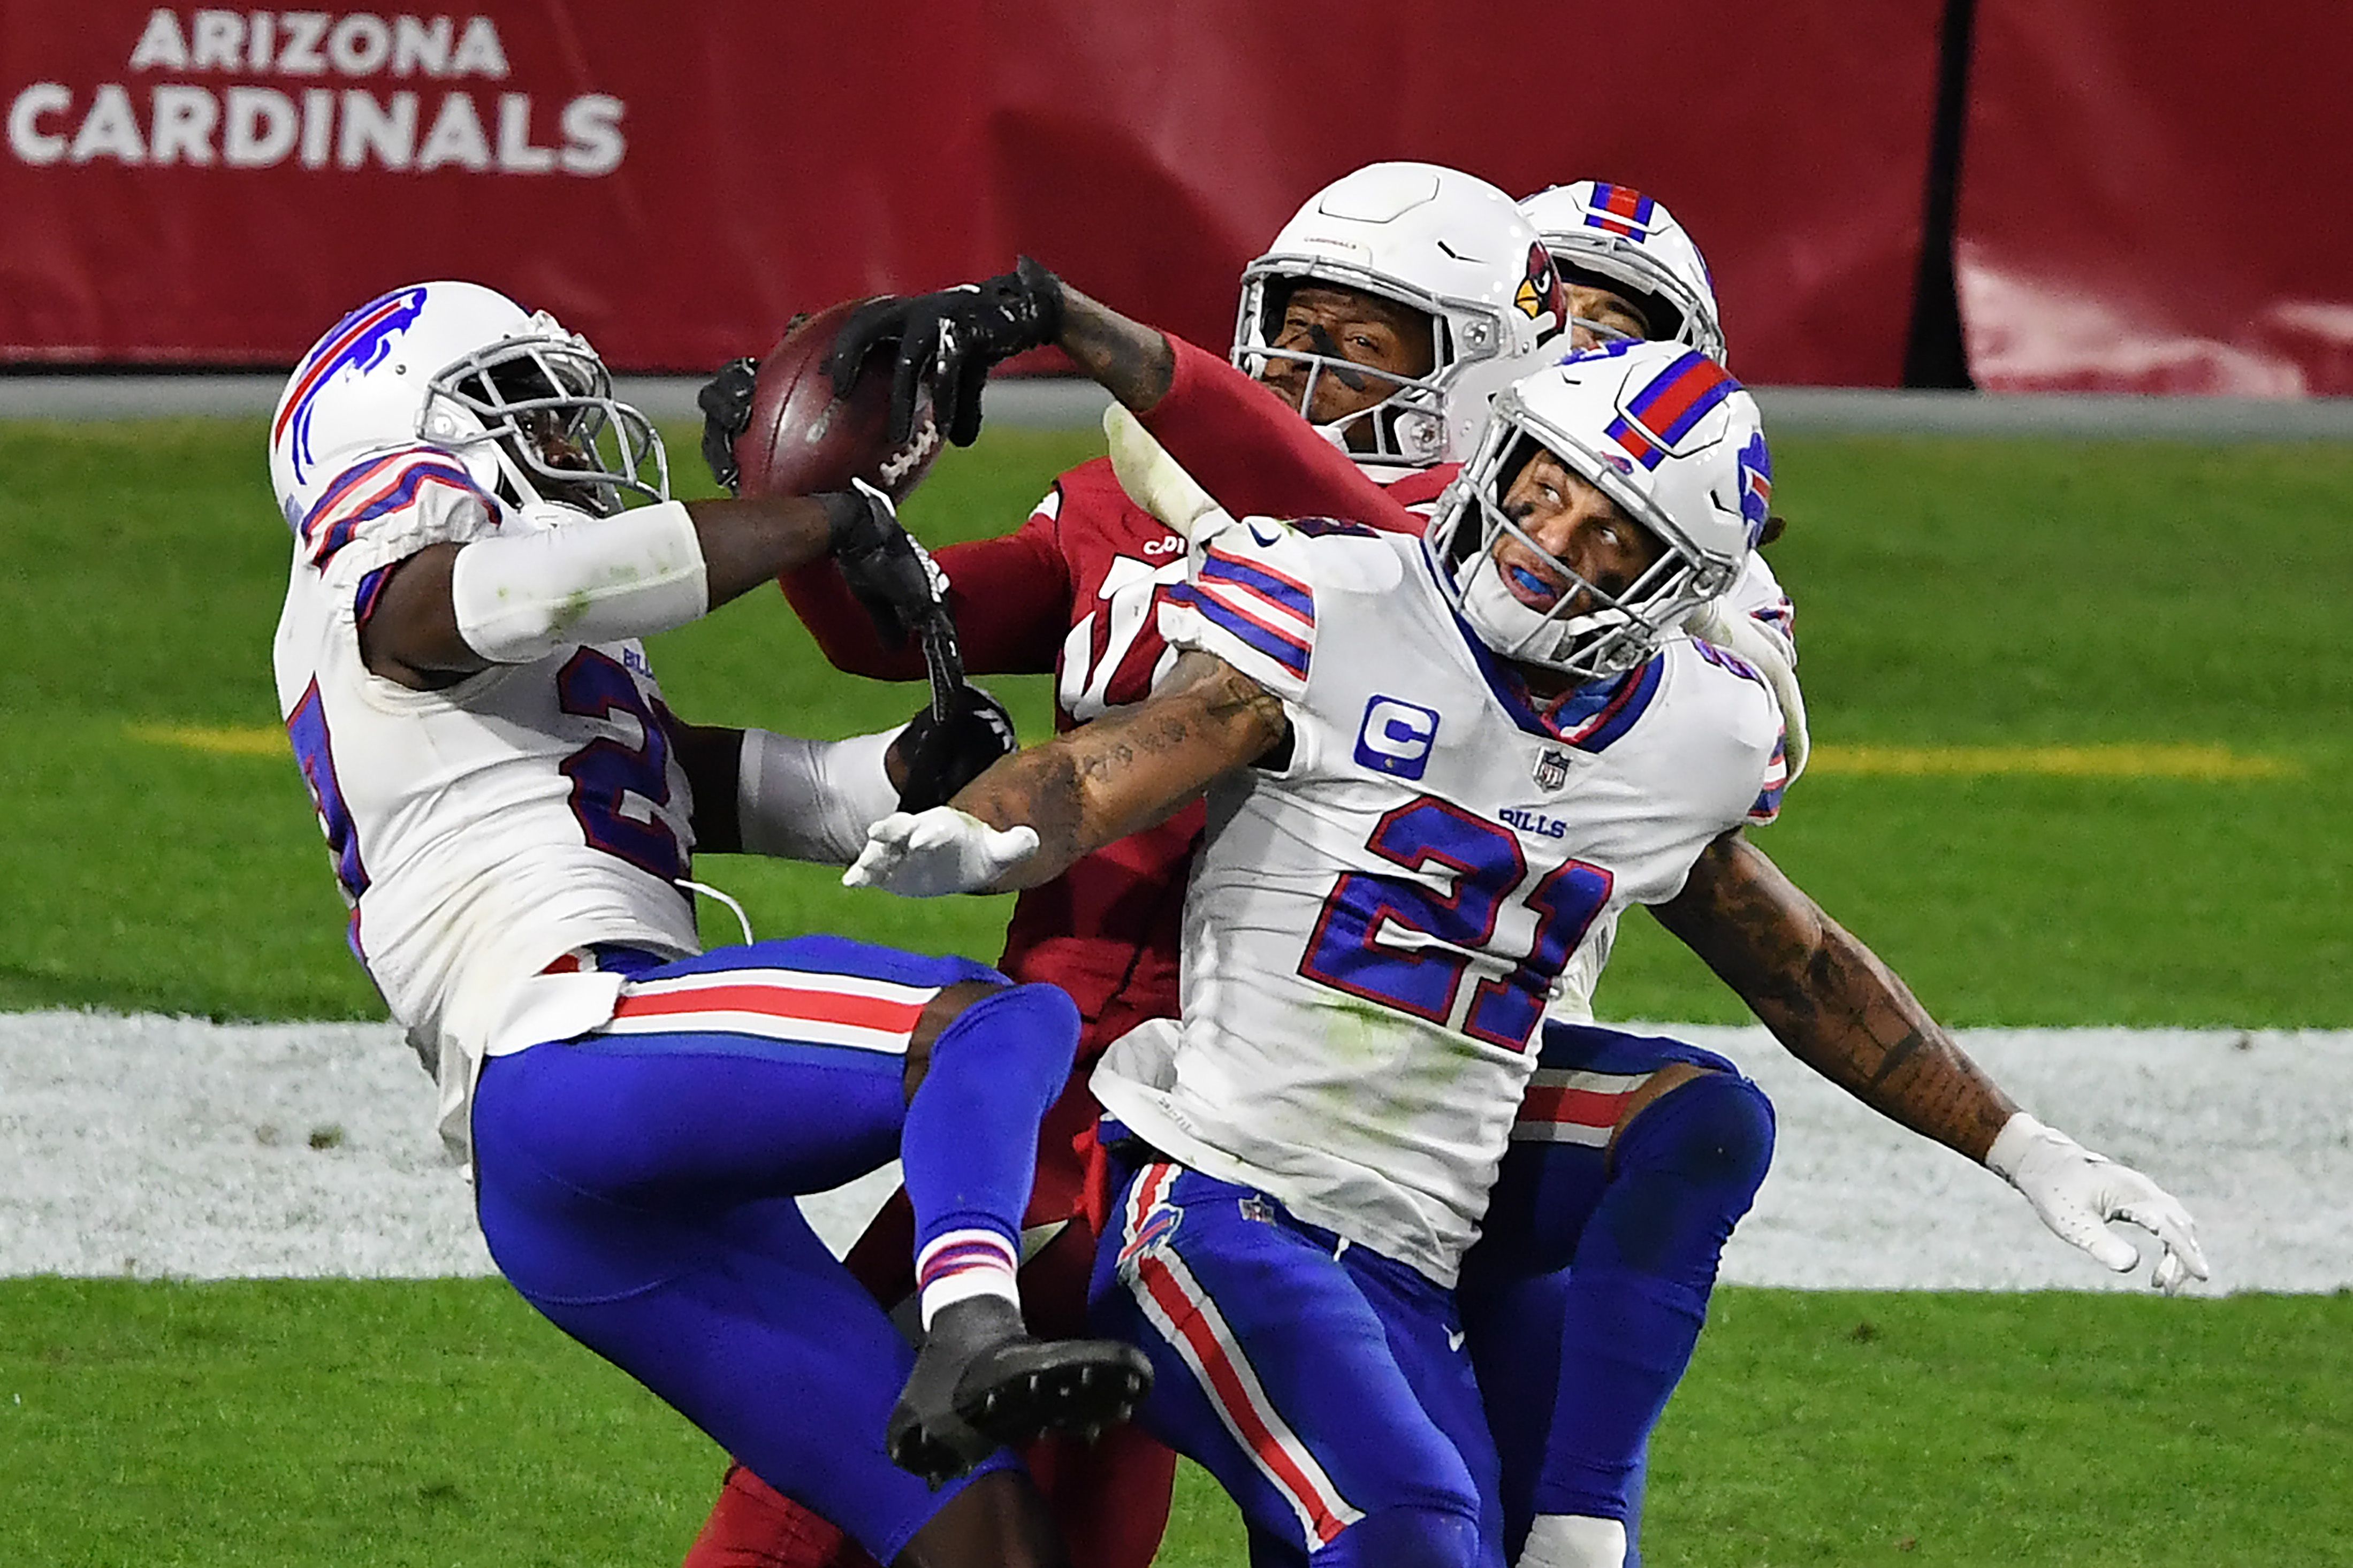 DeAndre Hopkins' Hail Mary TD catch wins game for Cardinals vs. Bills